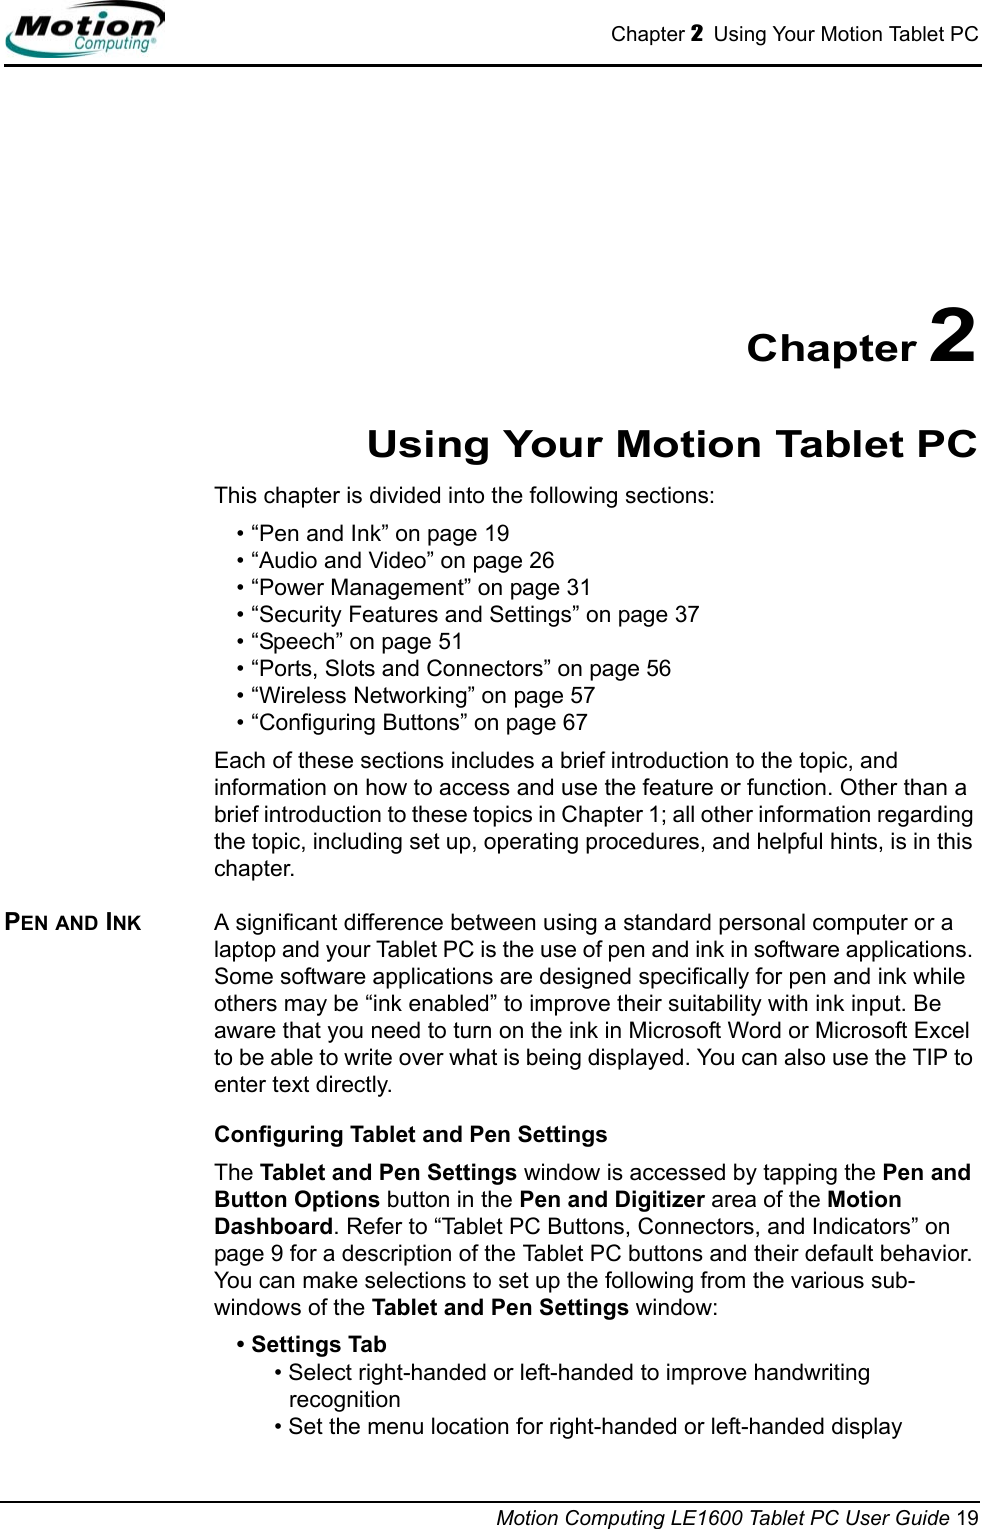 Chapter 2  Using Your Motion Tablet PCMotion Computing LE1600 Tablet PC User Guide 19Chapter 2Using Your Motion Tablet PCThis chapter is divided into the following sections:• “Pen and Ink” on page 19• “Audio and Video” on page 26• “Power Management” on page 31• “Security Features and Settings” on page 37• “Speech” on page 51• “Ports, Slots and Connectors” on page 56• “Wireless Networking” on page 57• “Configuring Buttons” on page 67Each of these sections includes a brief introduction to the topic, and information on how to access and use the feature or function. Other than a brief introduction to these topics in Chapter 1; all other information regarding the topic, including set up, operating procedures, and helpful hints, is in this chapter.PEN AND INK A significant difference between using a standard personal computer or a laptop and your Tablet PC is the use of pen and ink in software applications. Some software applications are designed specifically for pen and ink while others may be “ink enabled” to improve their suitability with ink input. Be aware that you need to turn on the ink in Microsoft Word or Microsoft Excel to be able to write over what is being displayed. You can also use the TIP to enter text directly. Configuring Tablet and Pen SettingsThe Tablet and Pen Settings window is accessed by tapping the Pen and Button Options button in the Pen and Digitizer area of the Motion Dashboard. Refer to “Tablet PC Buttons, Connectors, and Indicators” on page 9 for a description of the Tablet PC buttons and their default behavior. You can make selections to set up the following from the various sub-windows of the Tablet and Pen Settings window:• Settings Tab• Select right-handed or left-handed to improve handwriting recognition• Set the menu location for right-handed or left-handed display